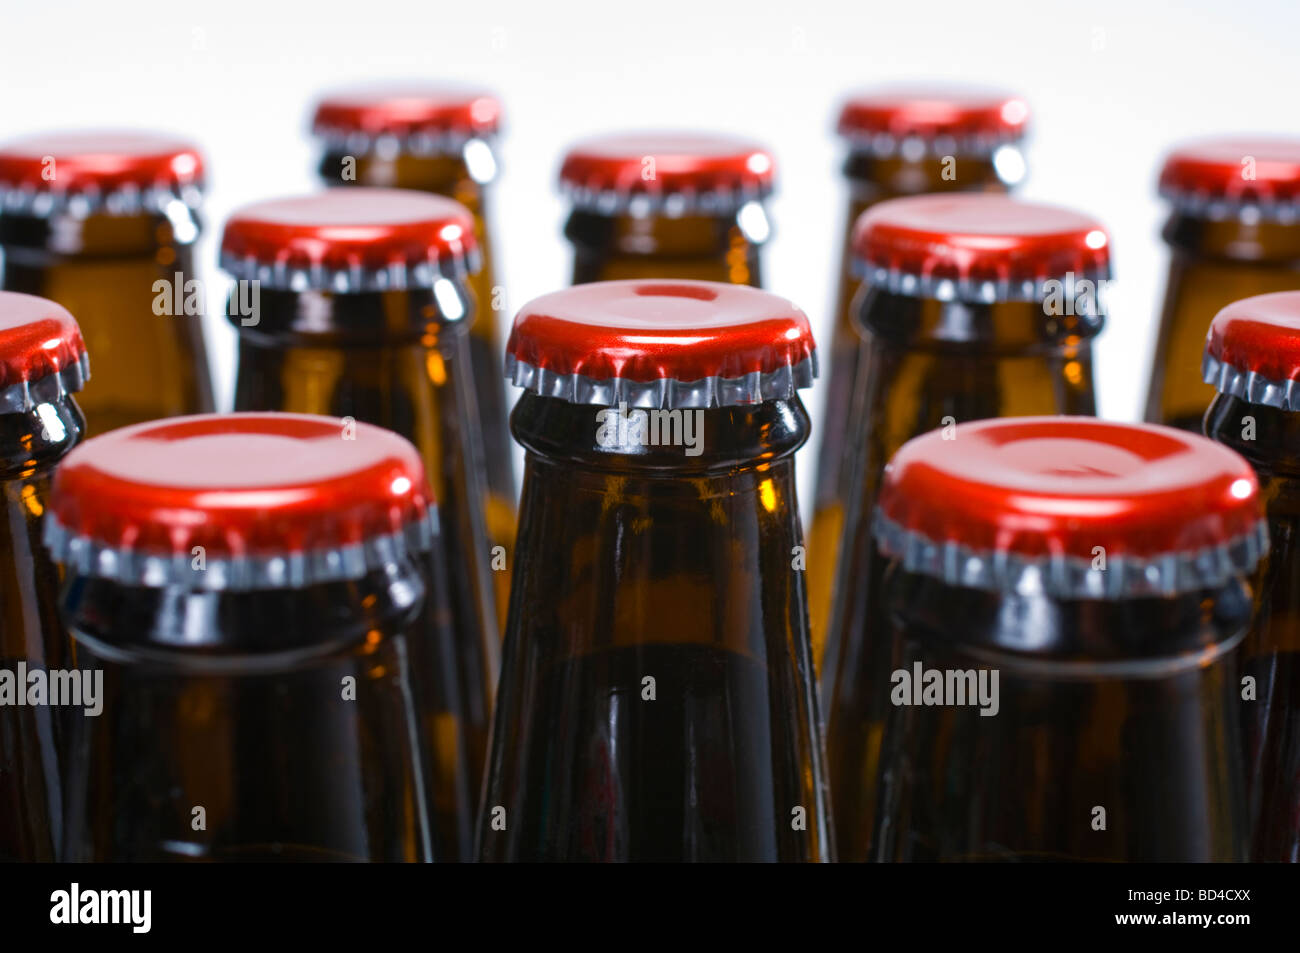 Beer bottles with red caps - Home made beer bottled and ready for consumption Stock Photo